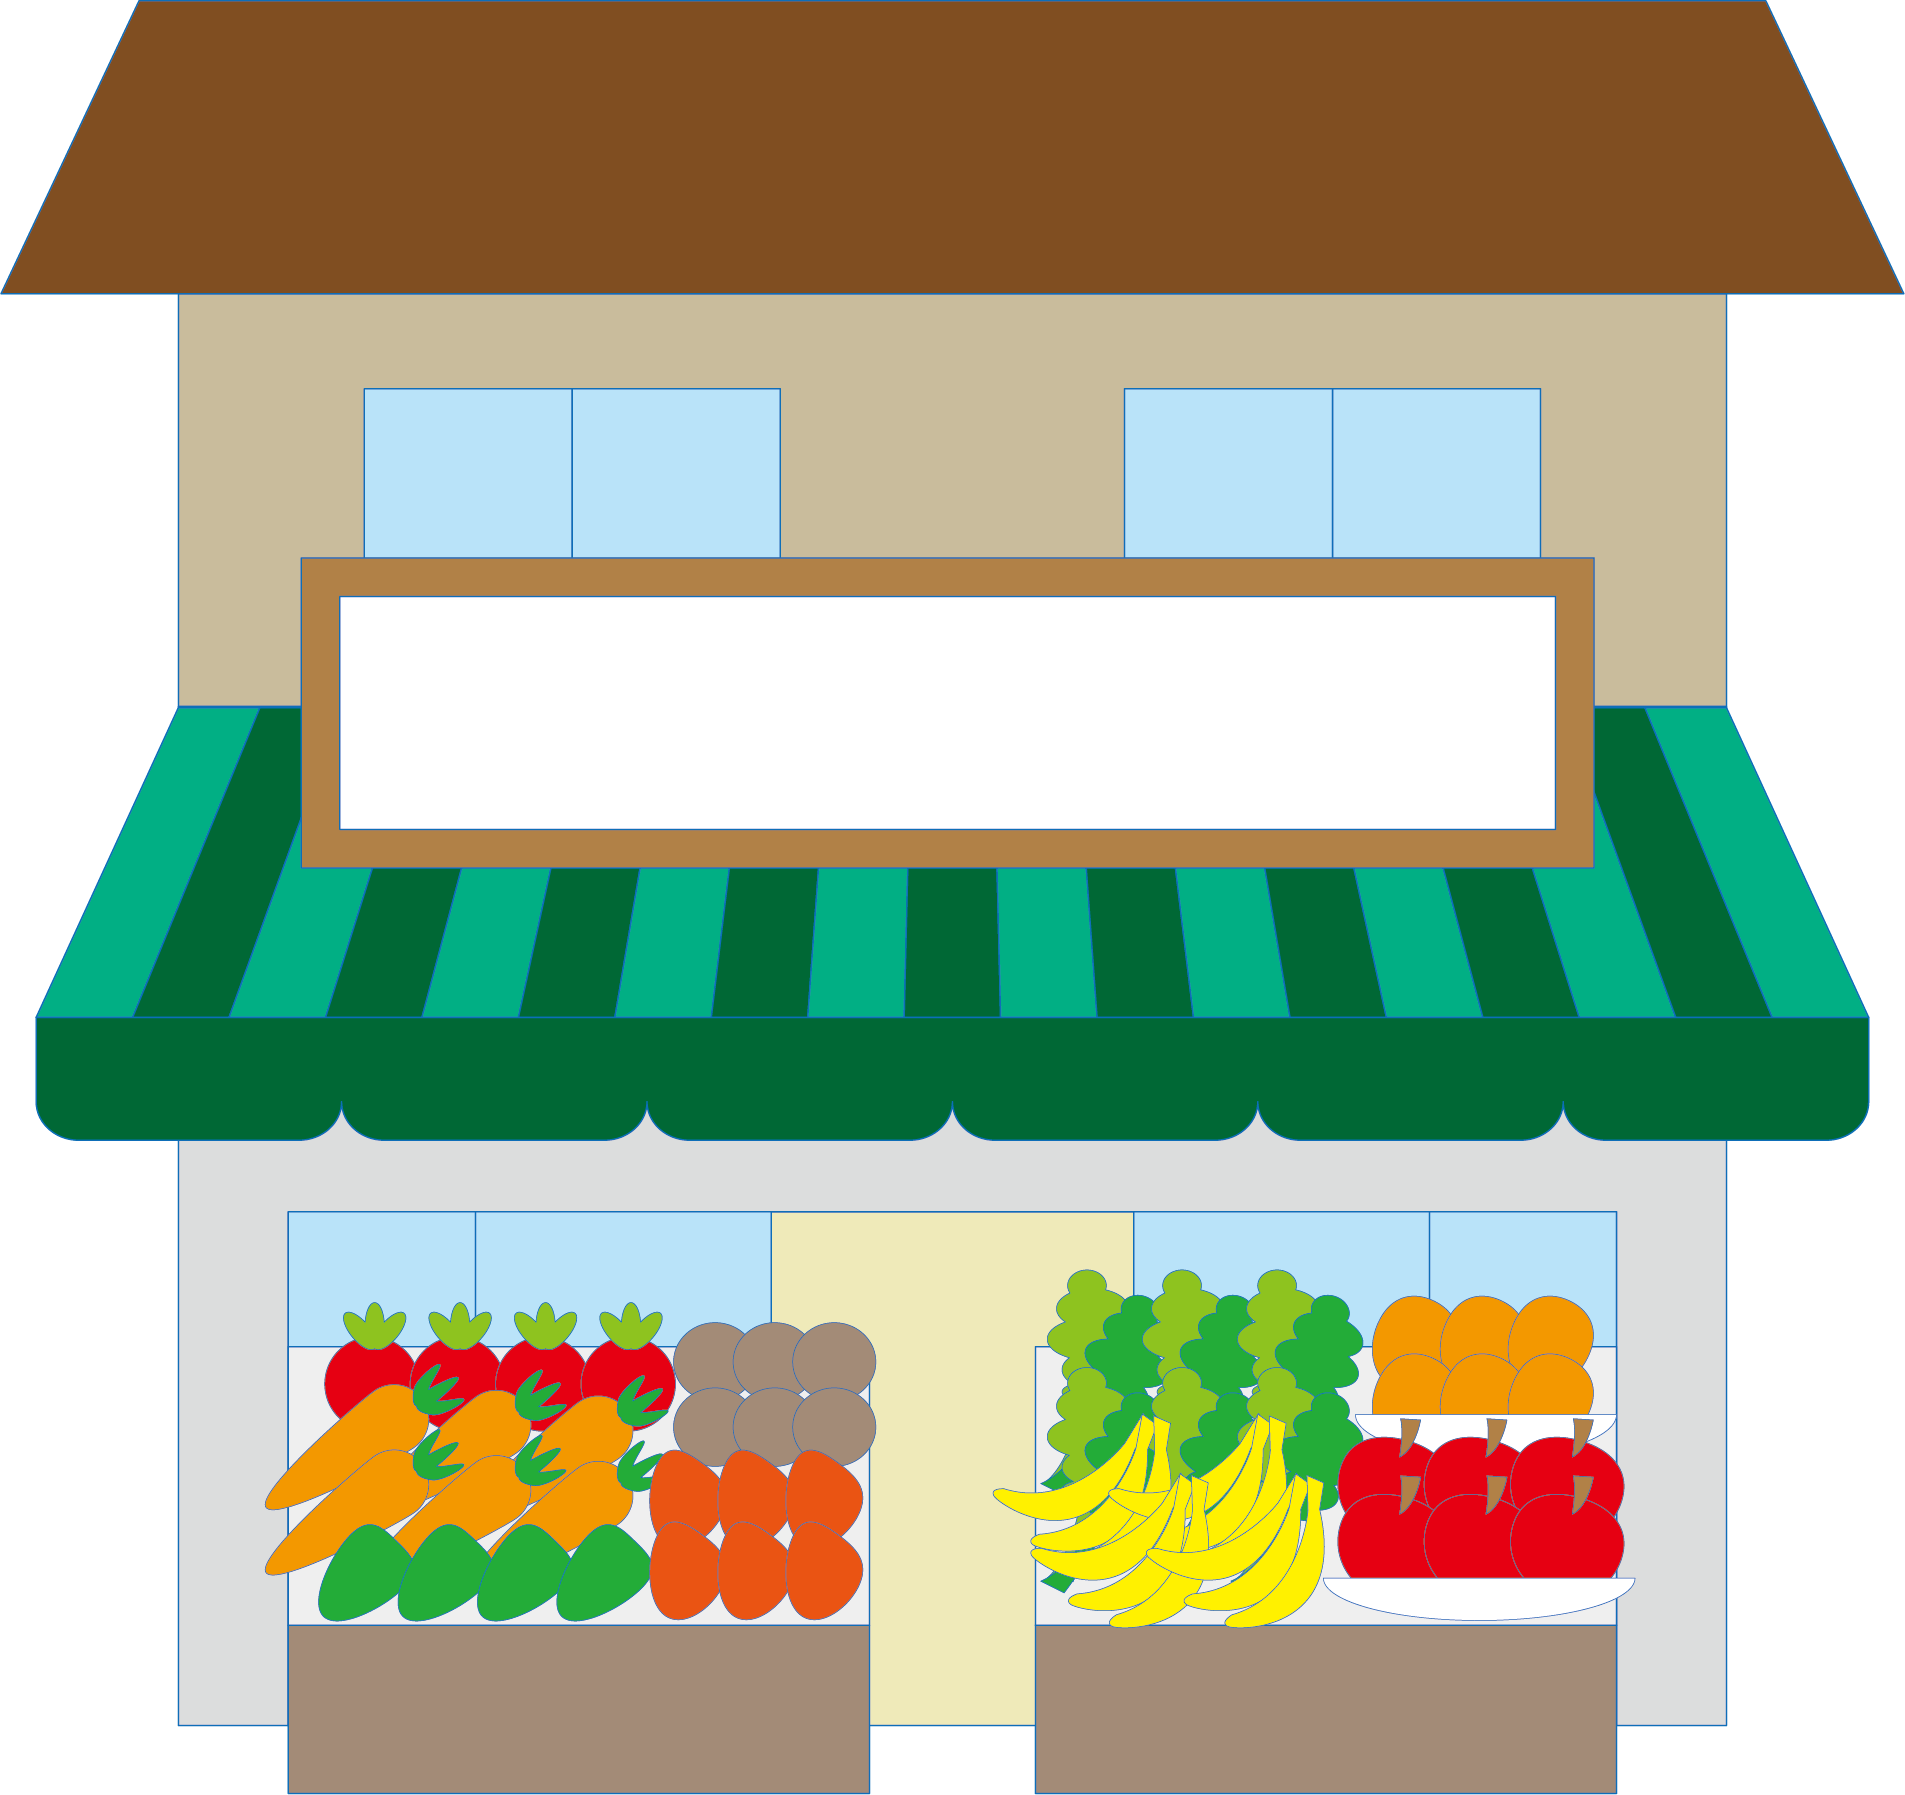 vegetables clipart trolley